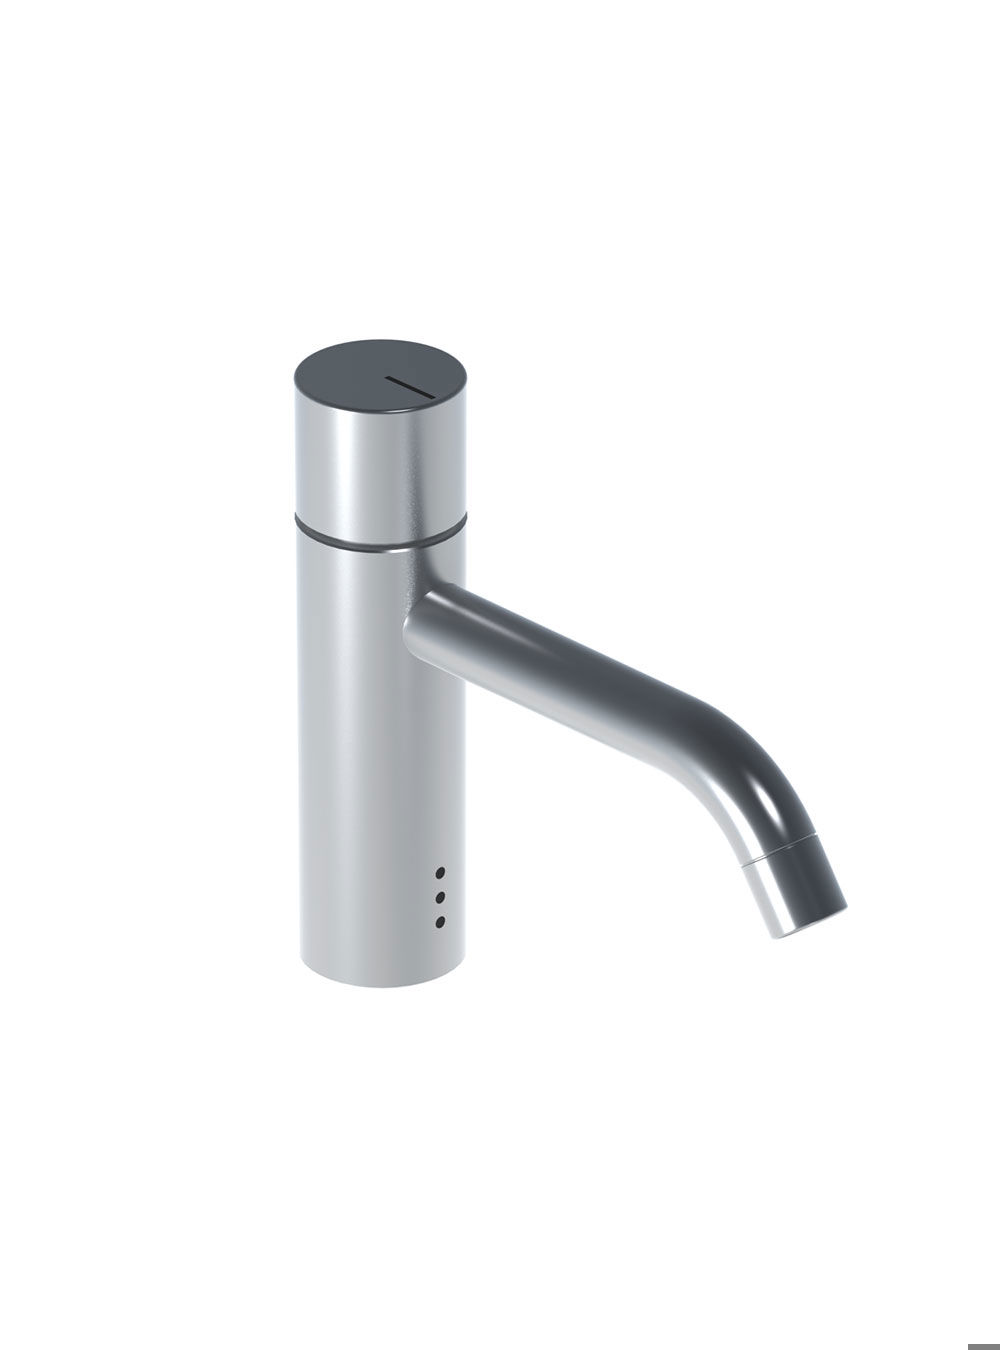 HV1E/150: Basin mixer with on-off sensor for ‘hands free’ operation with spout projection 150 mm.      The tem